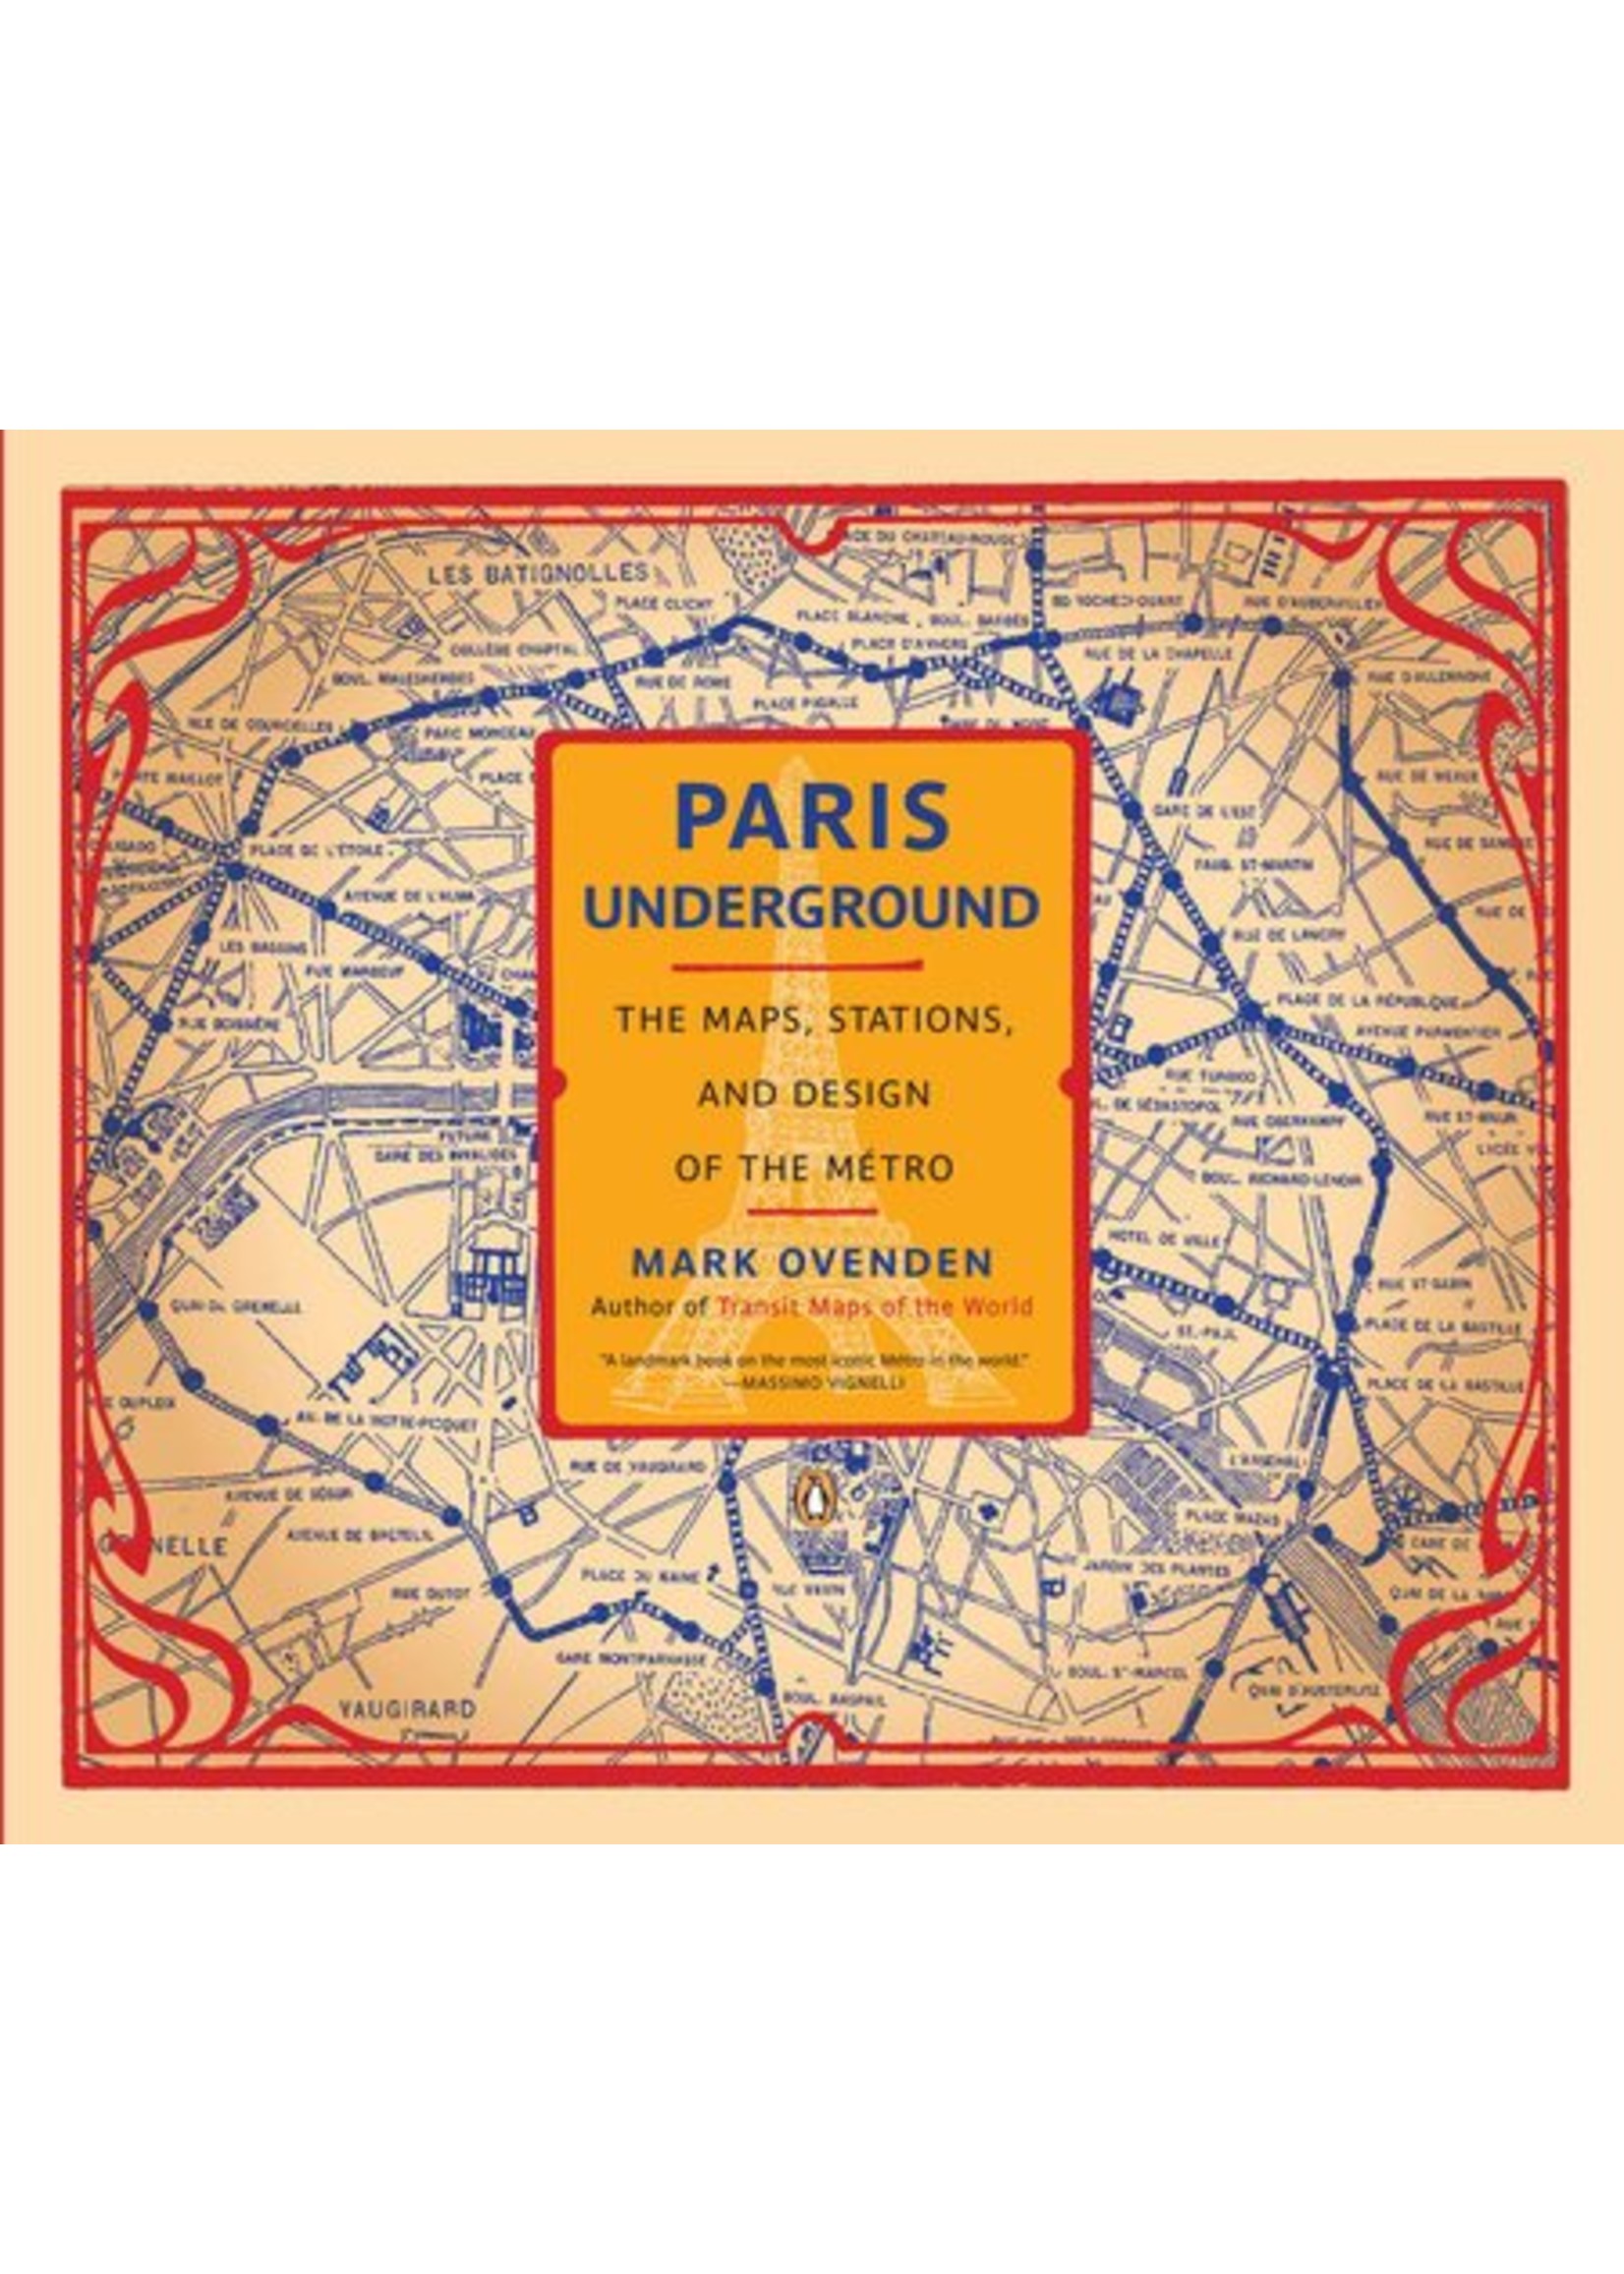 Paris Underground - The Maps, Stations, and Design of the Metro